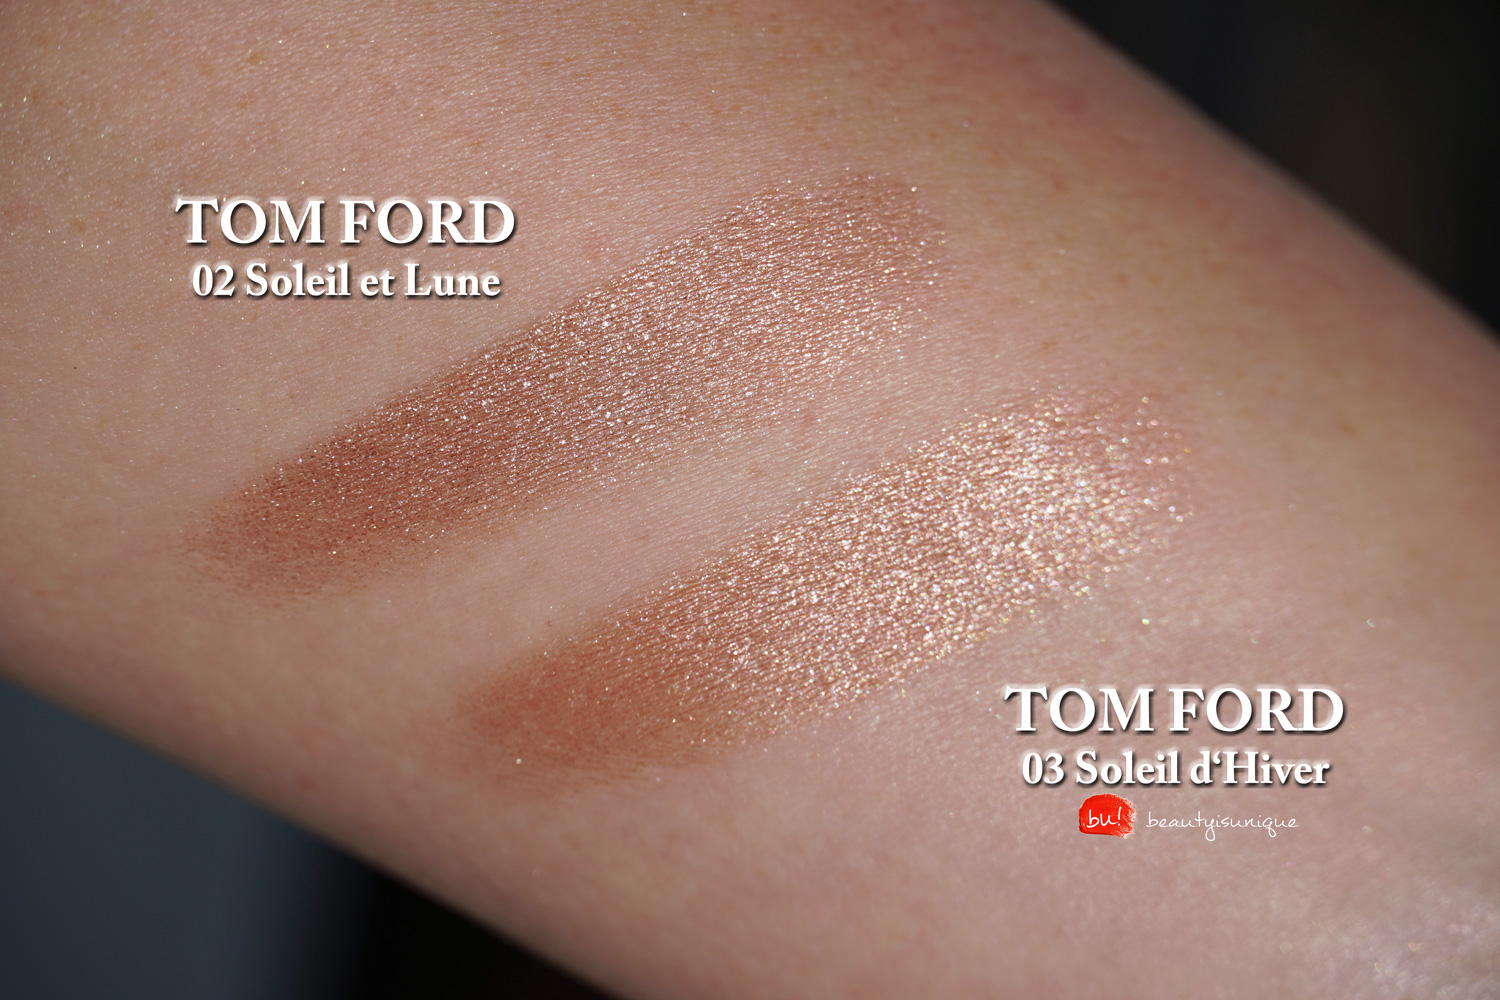 Tom-ford-soleil-et-lune-swatches